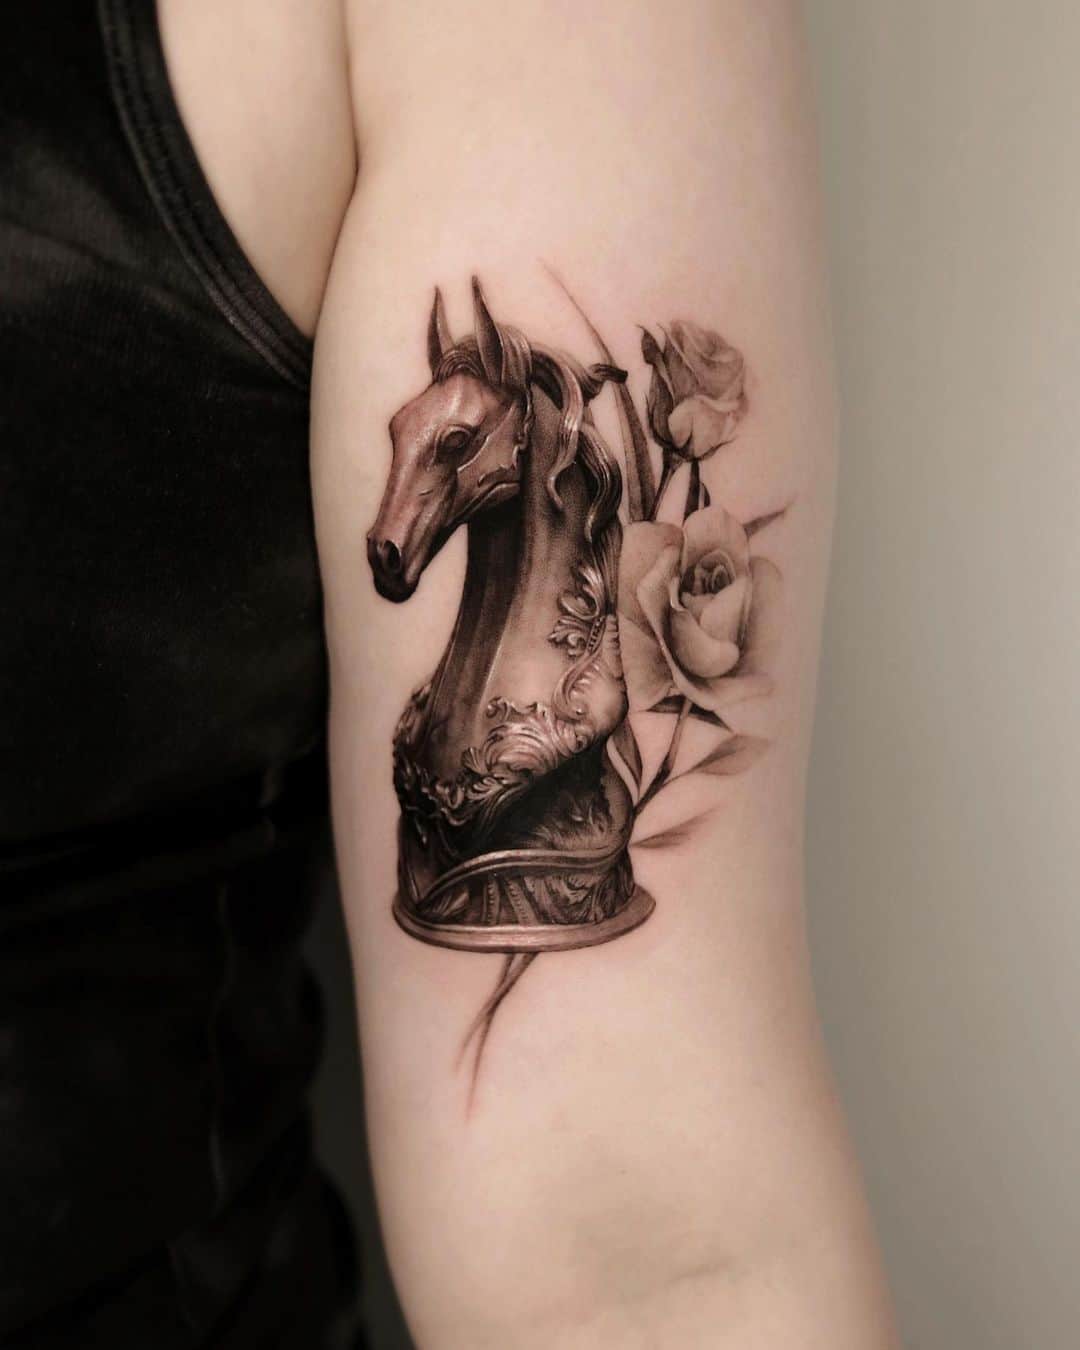 Black and gray tattoo by moco tattoo 2